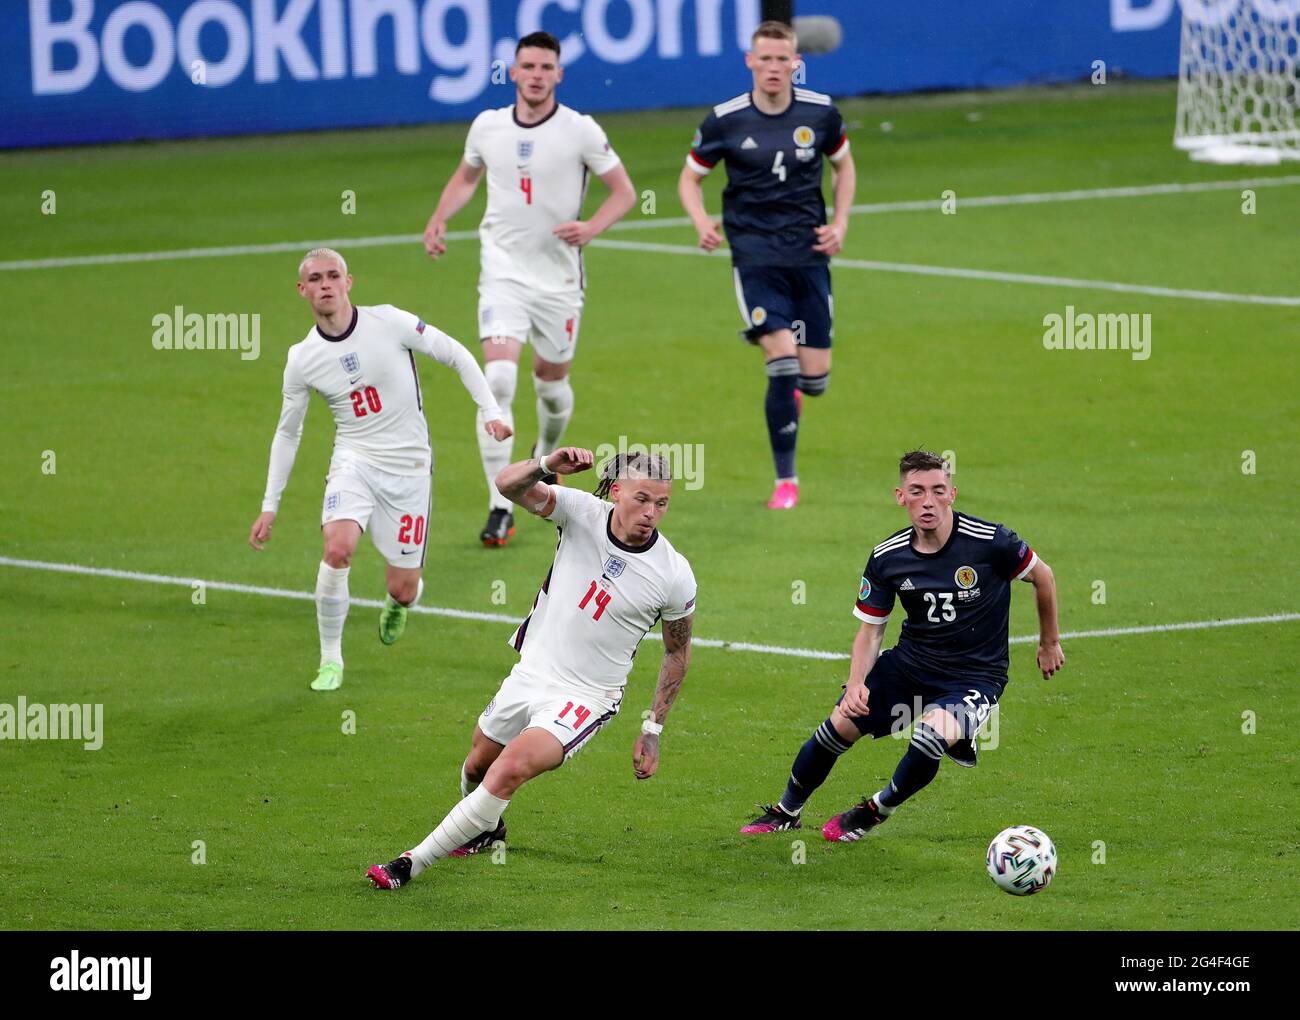 RICE,MCTOMINAY,FODEN,PHILLIPS,GILMOUR, ENGLAND V SCOTLAND, 2021 Banque D'Images